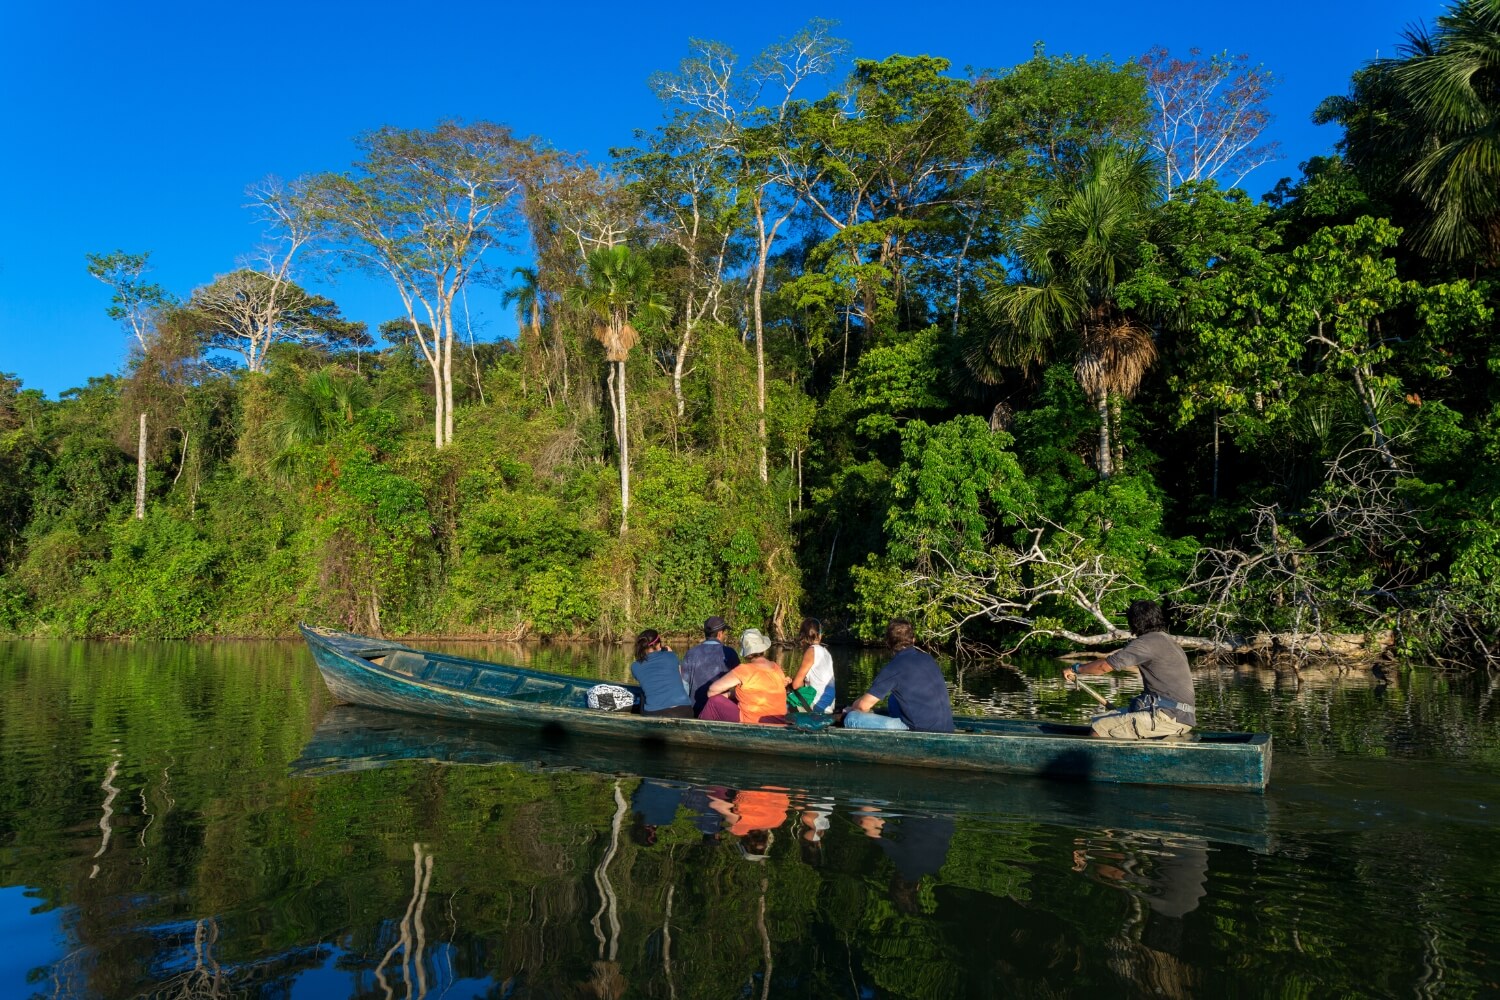 Why explore the Peruvian Amazon Jungle on your Vacation